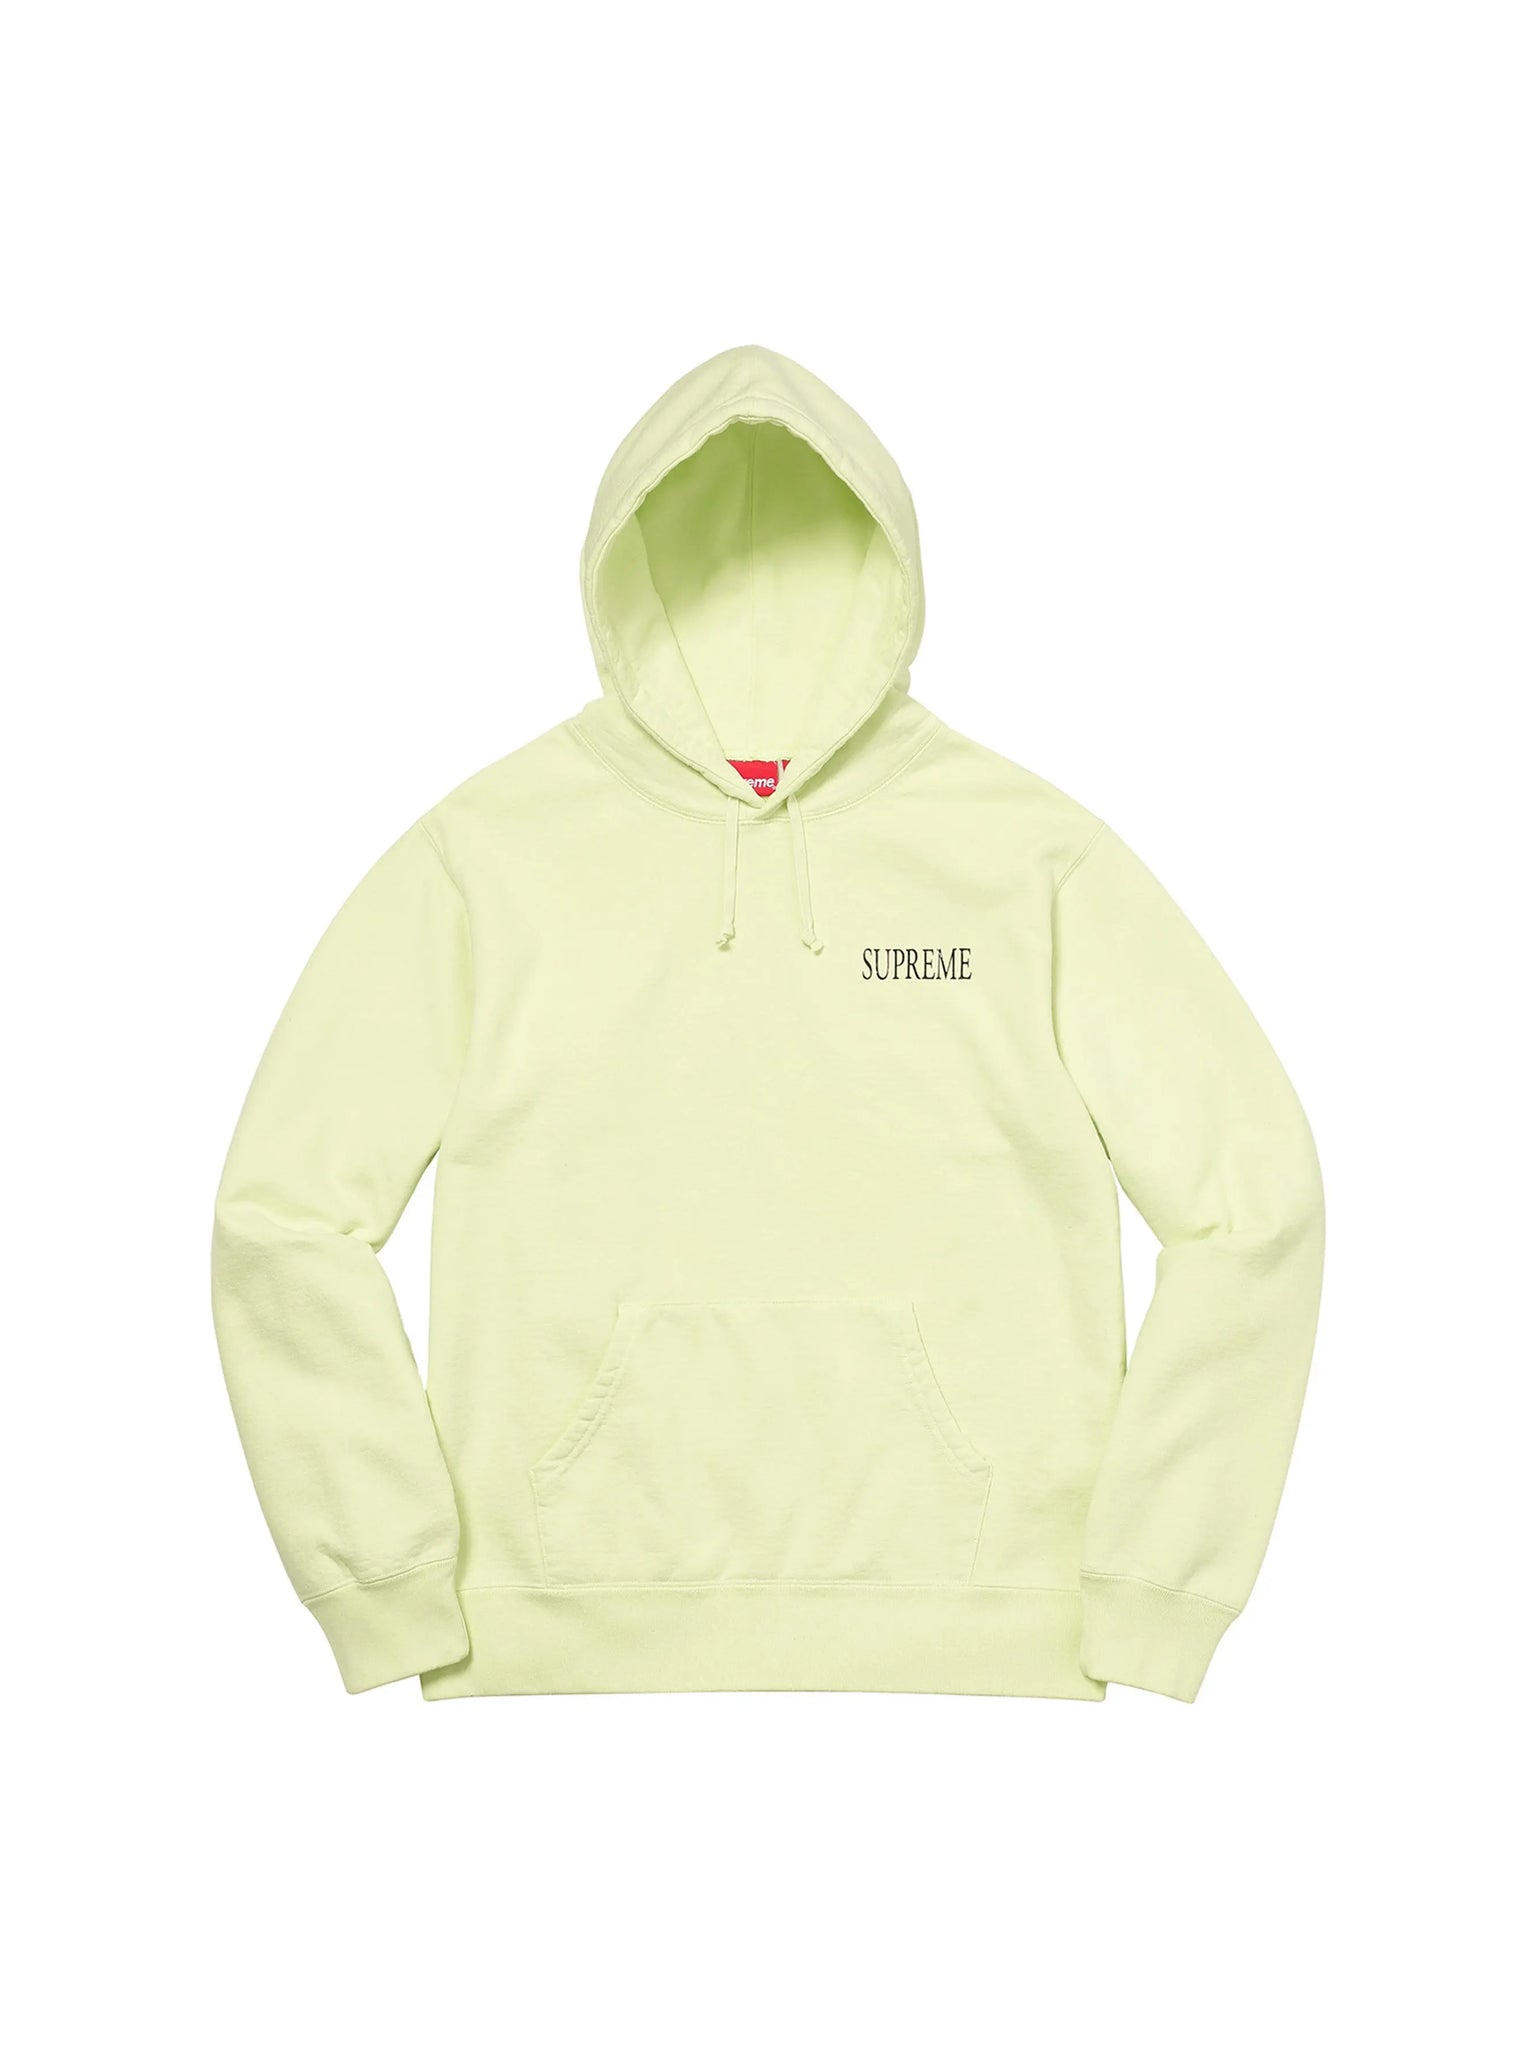 Supreme Decline Hooded Sweatshirt Pale Lime in Auckland, New Zealand - Shop name